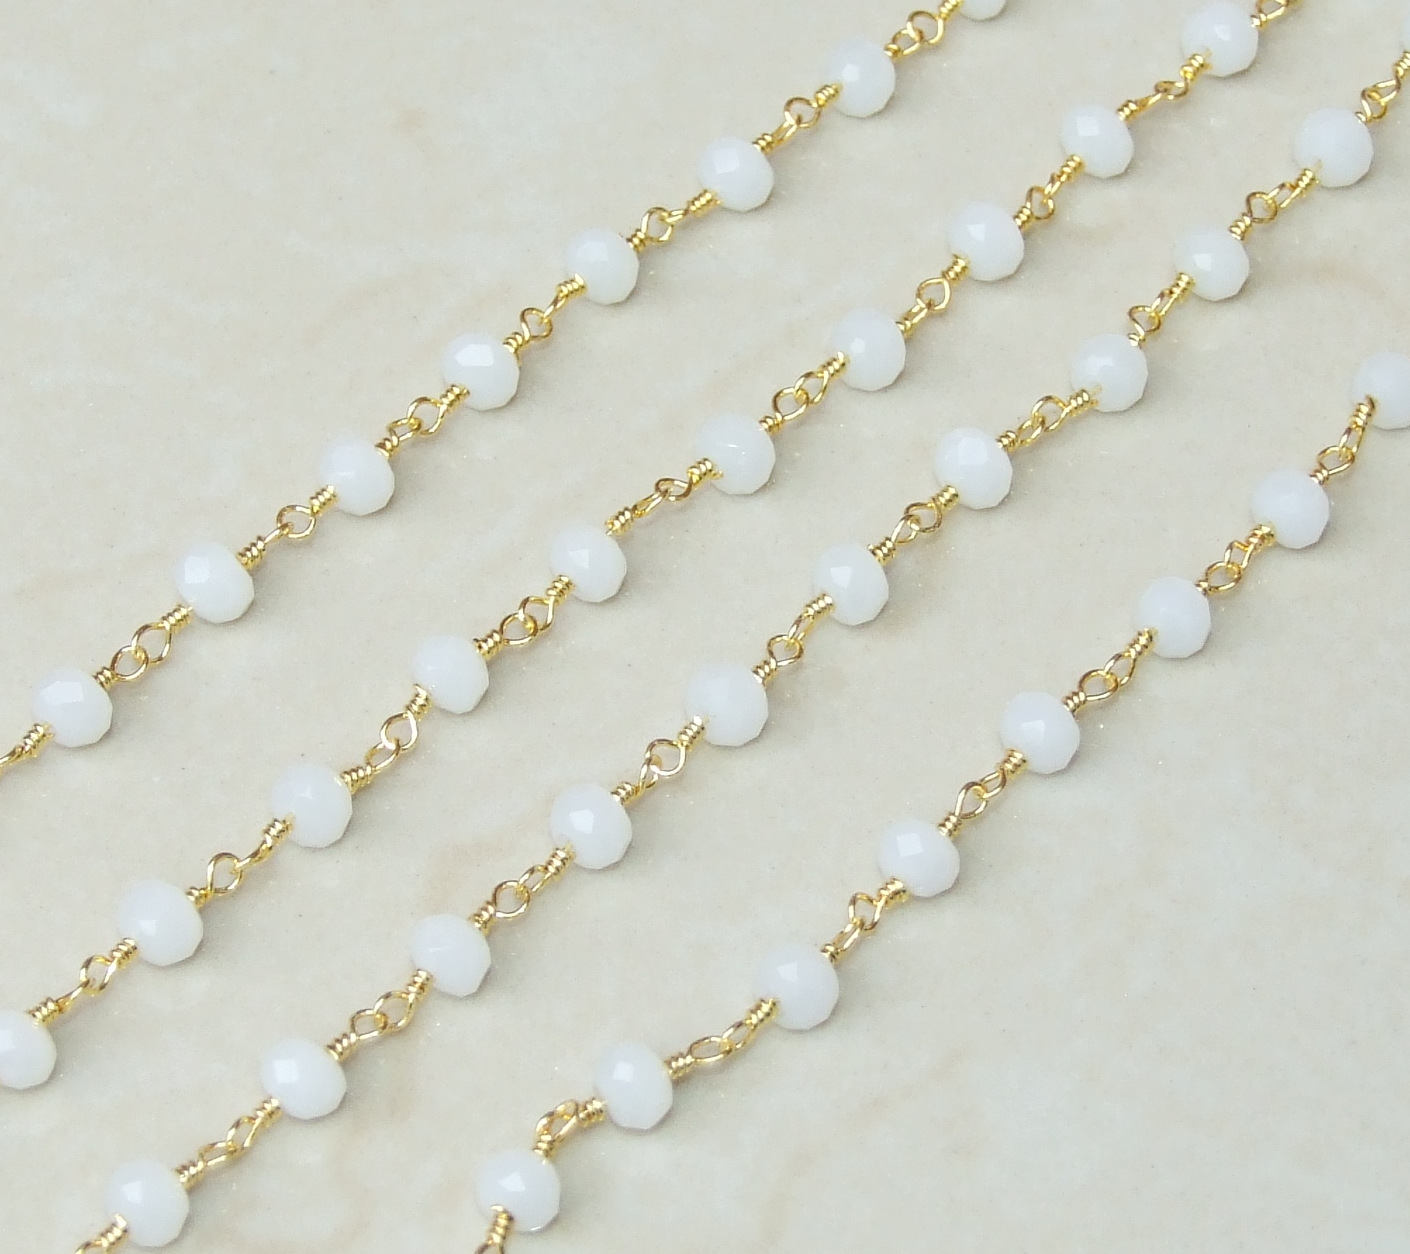 Small White Opalized Glass Rosary Chain, Bulk Chain, Rondelle Glass Beads, Beaded Chain, Body Chain, Gold Chain, Necklace Chain, Belly Chain